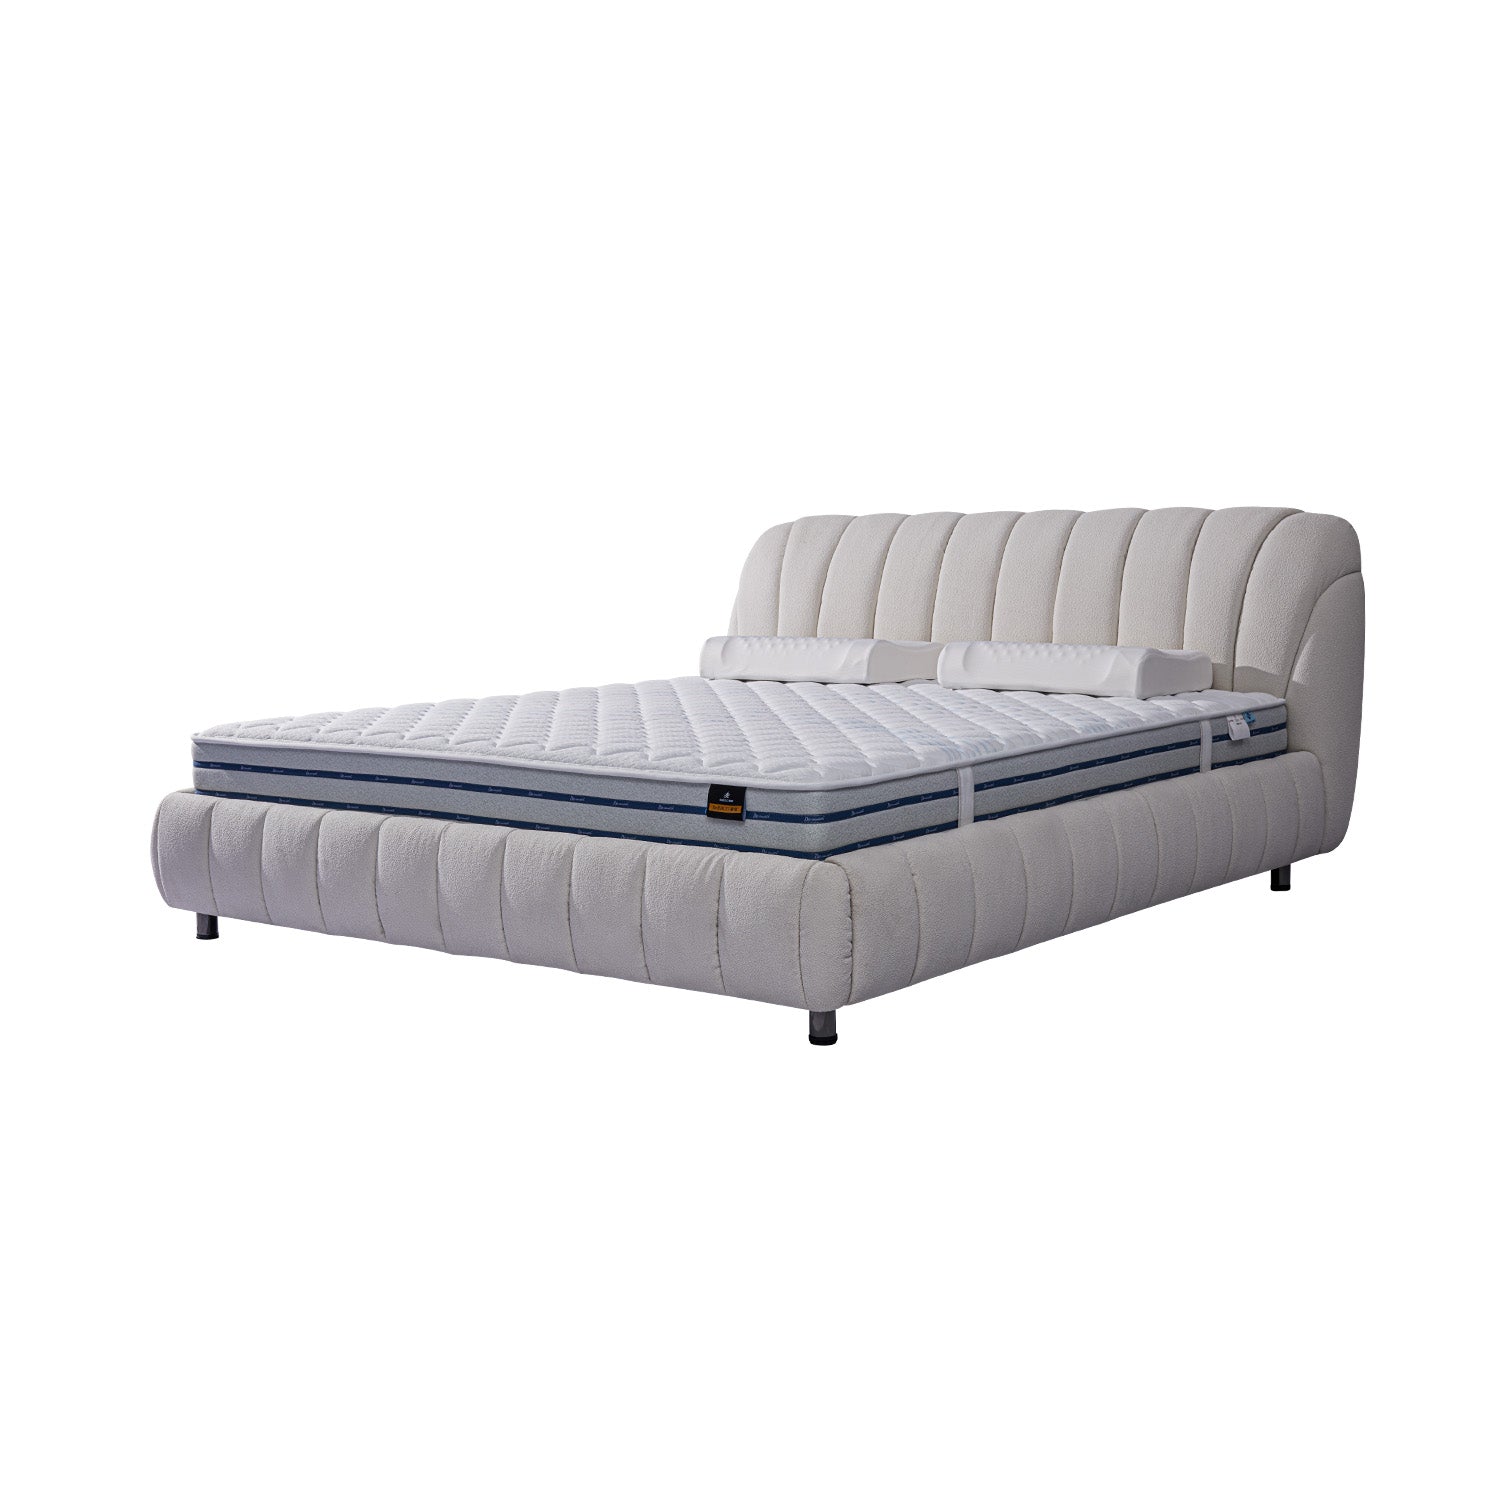 White leather bed frame BOC1 - 015 with quilted mattress and pillows, modern design with curved headboard, sturdy platform for quiet and stable sleep.